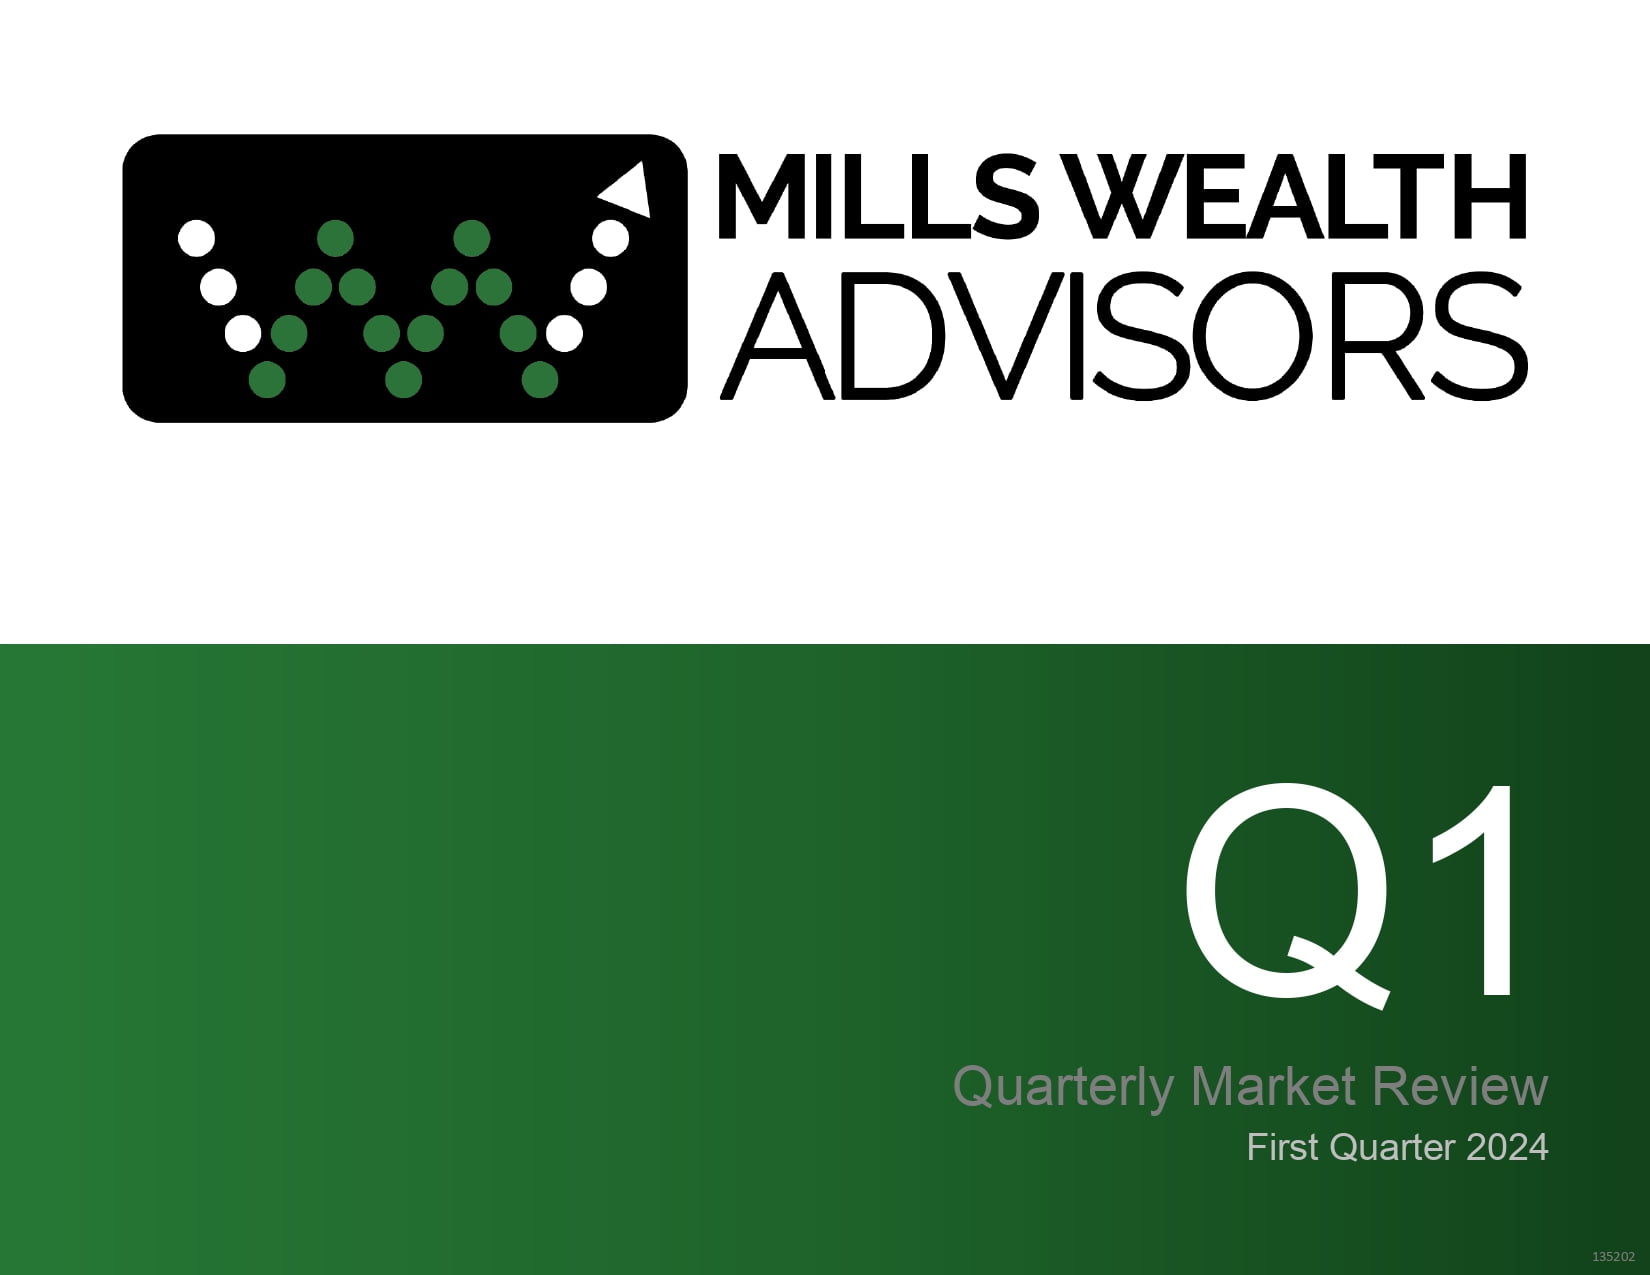 Mills Wealth Quarterly Market Review